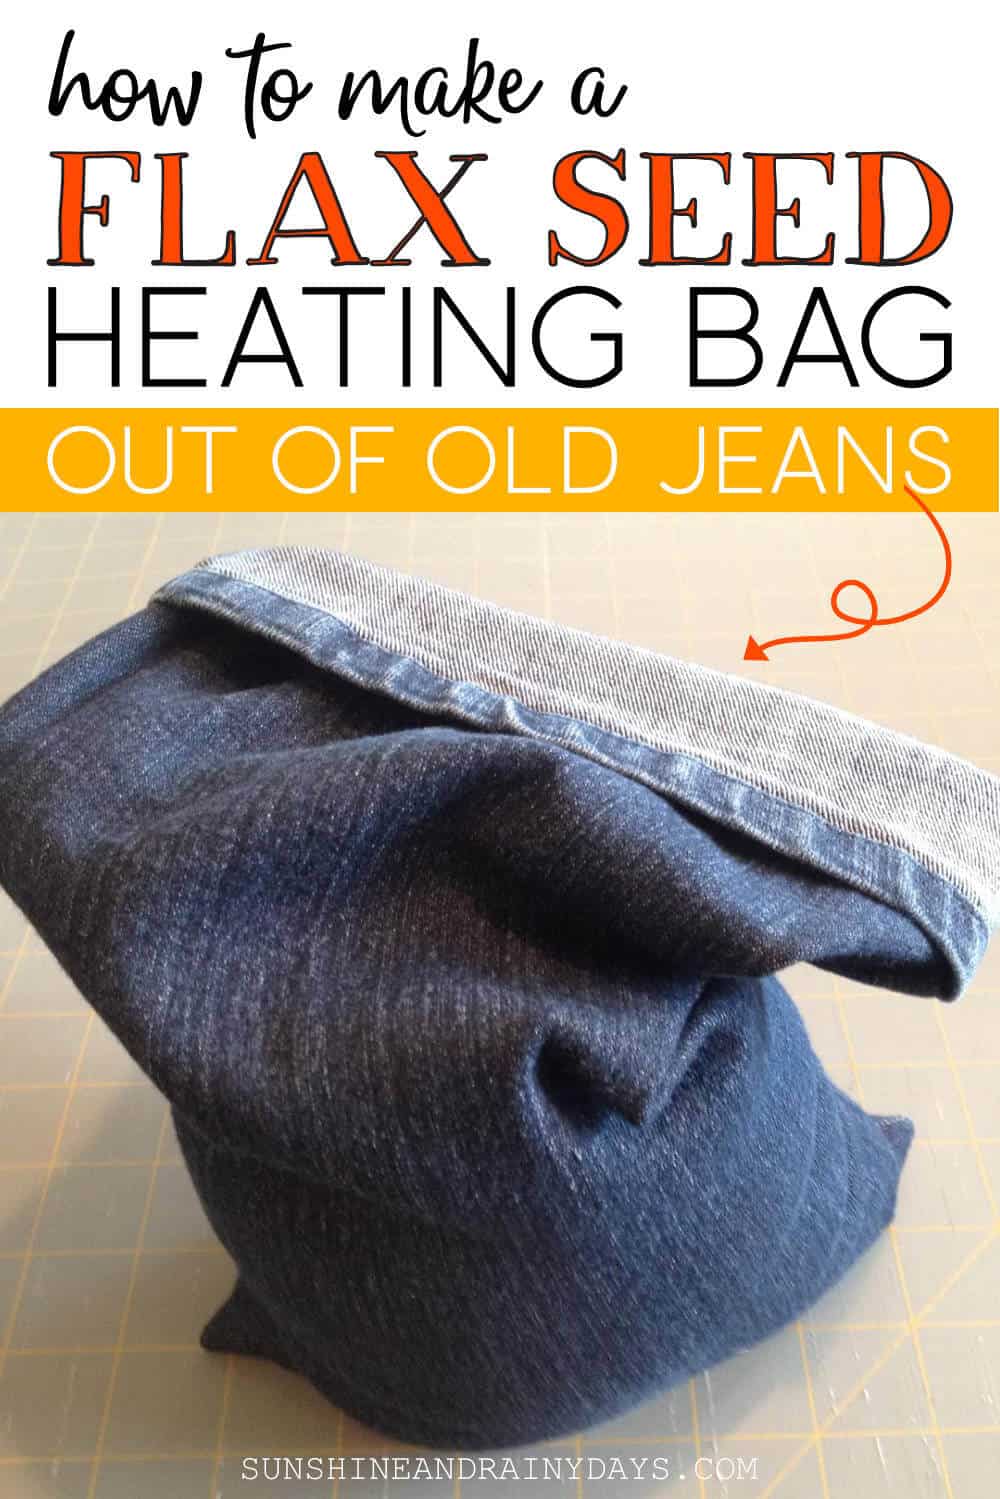 How To Make Flax Seed Heating Bag Of Old Jeans - Sunshine and Rainy Days